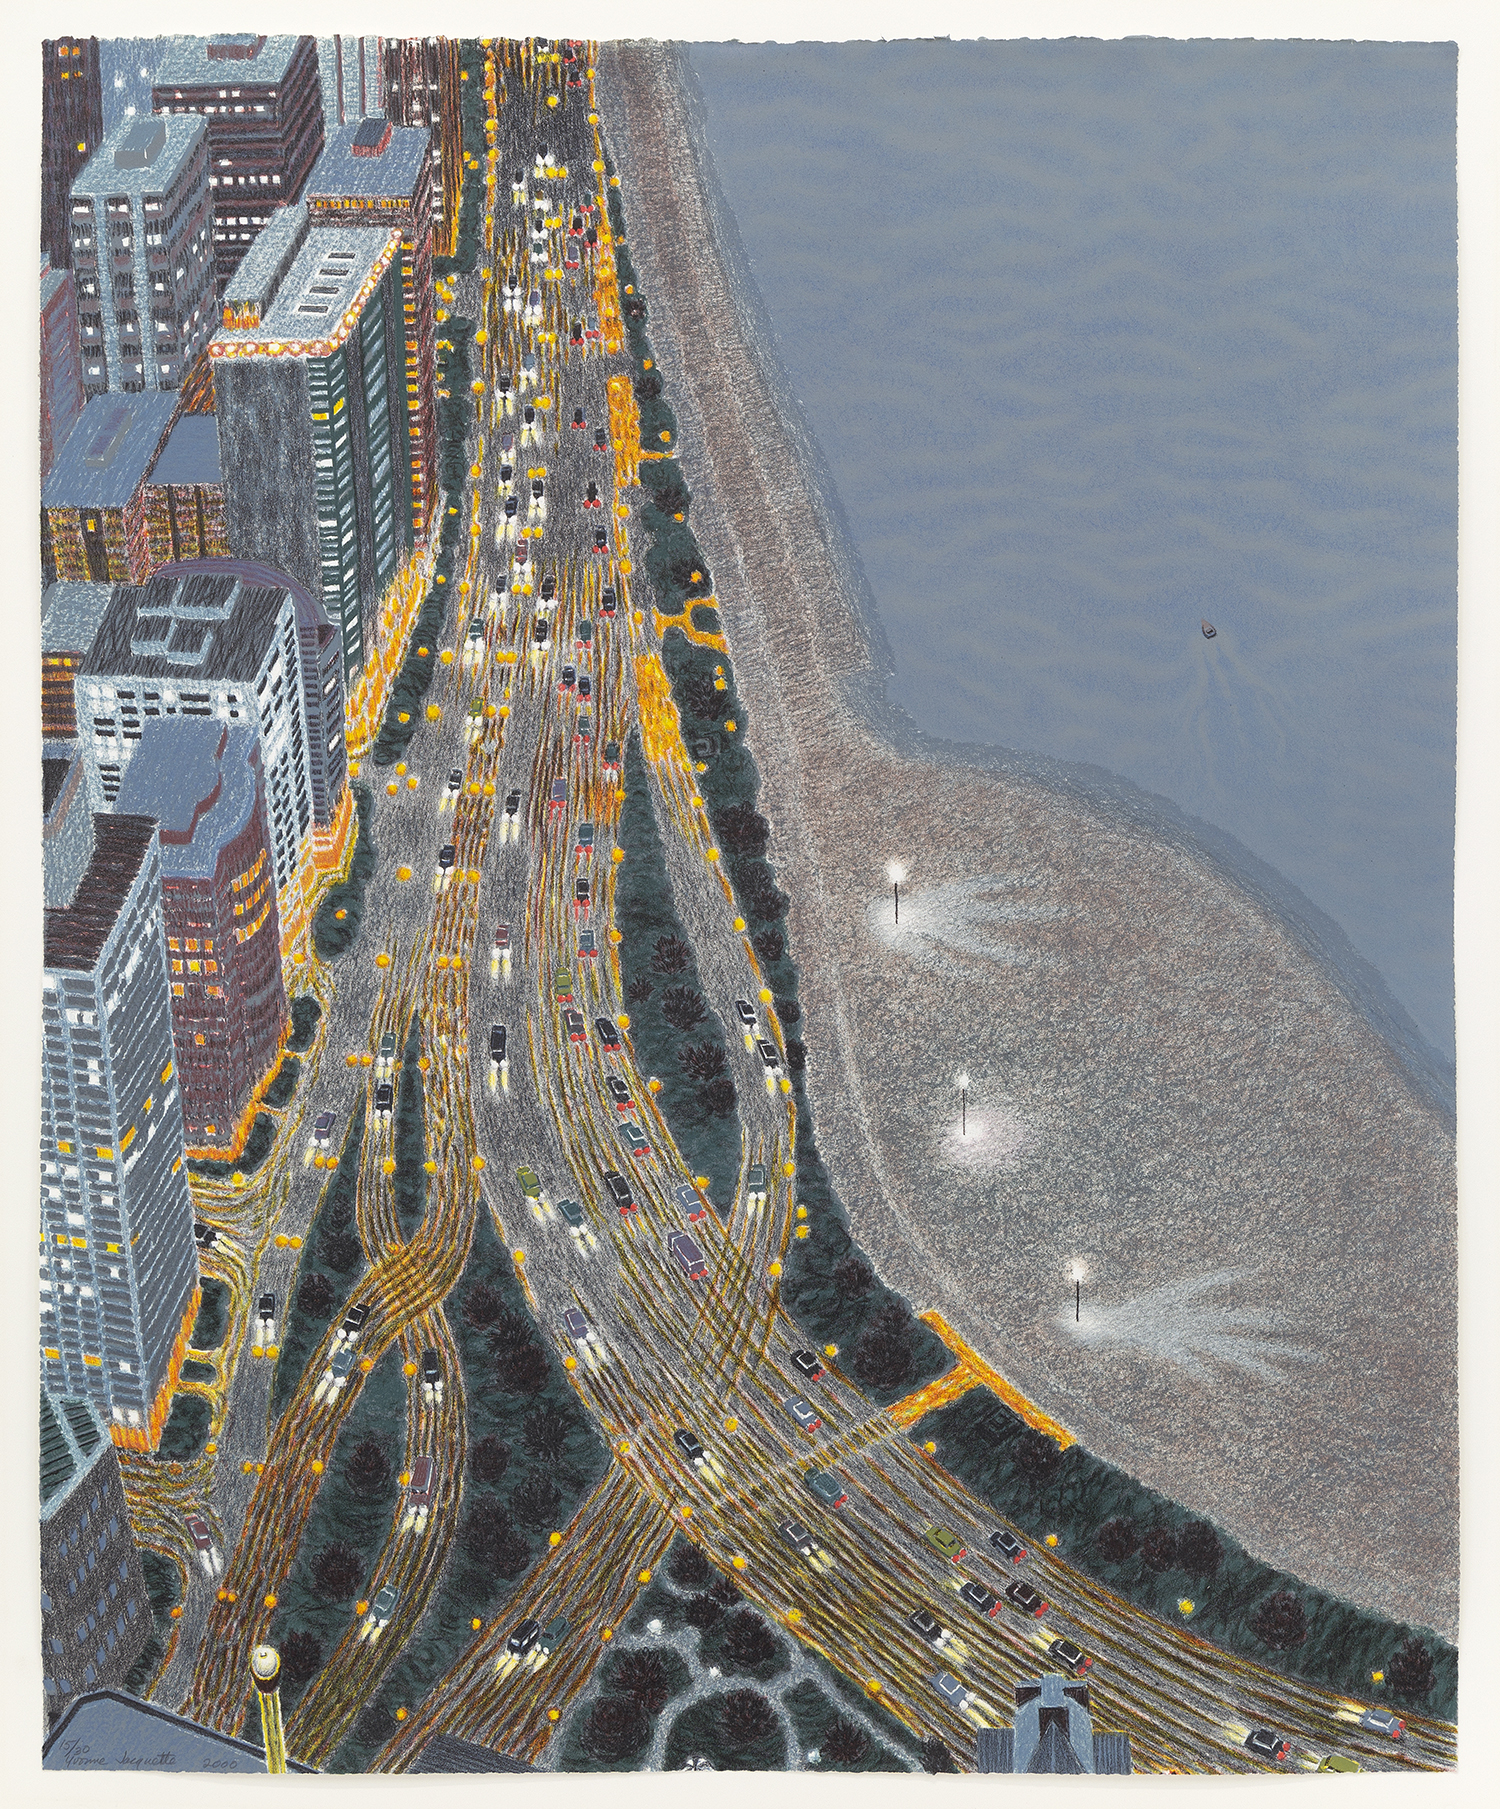 Dusk Descending, 2000, Lithograph, 33 1/4 x 27 inches (84.5 x 68.6 cm), Edition of 30